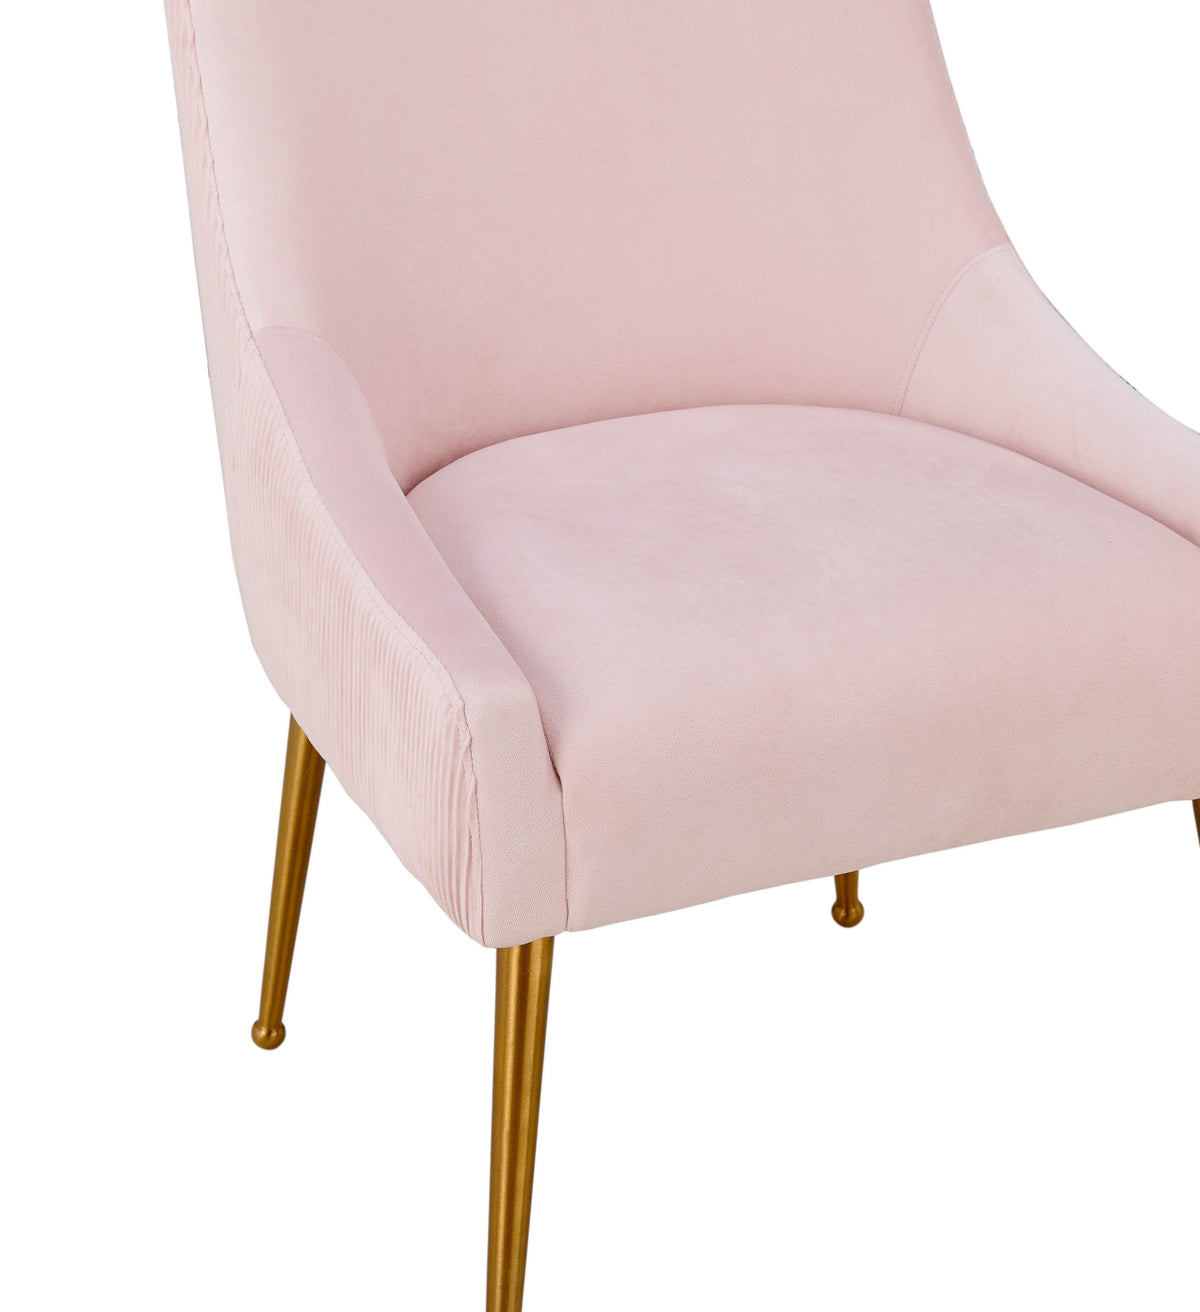 Prado Pleated Blush Velvet With Gold Frame Chair - Luxury Living Collection